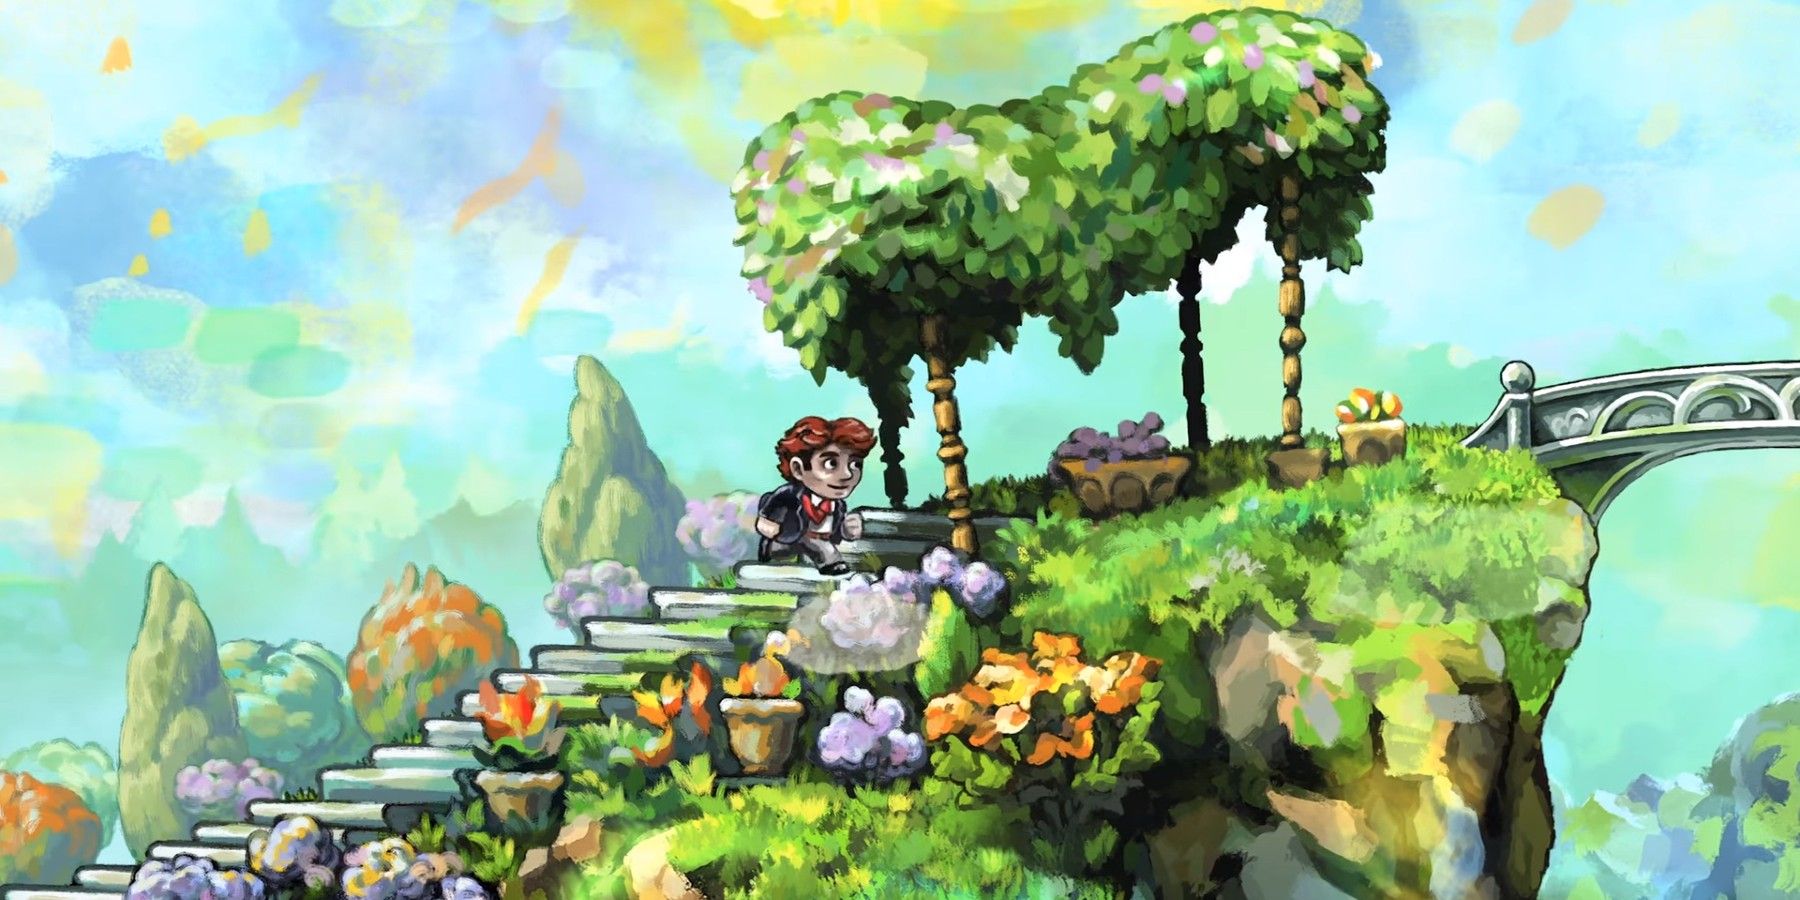 A gameplay scene from Braid 